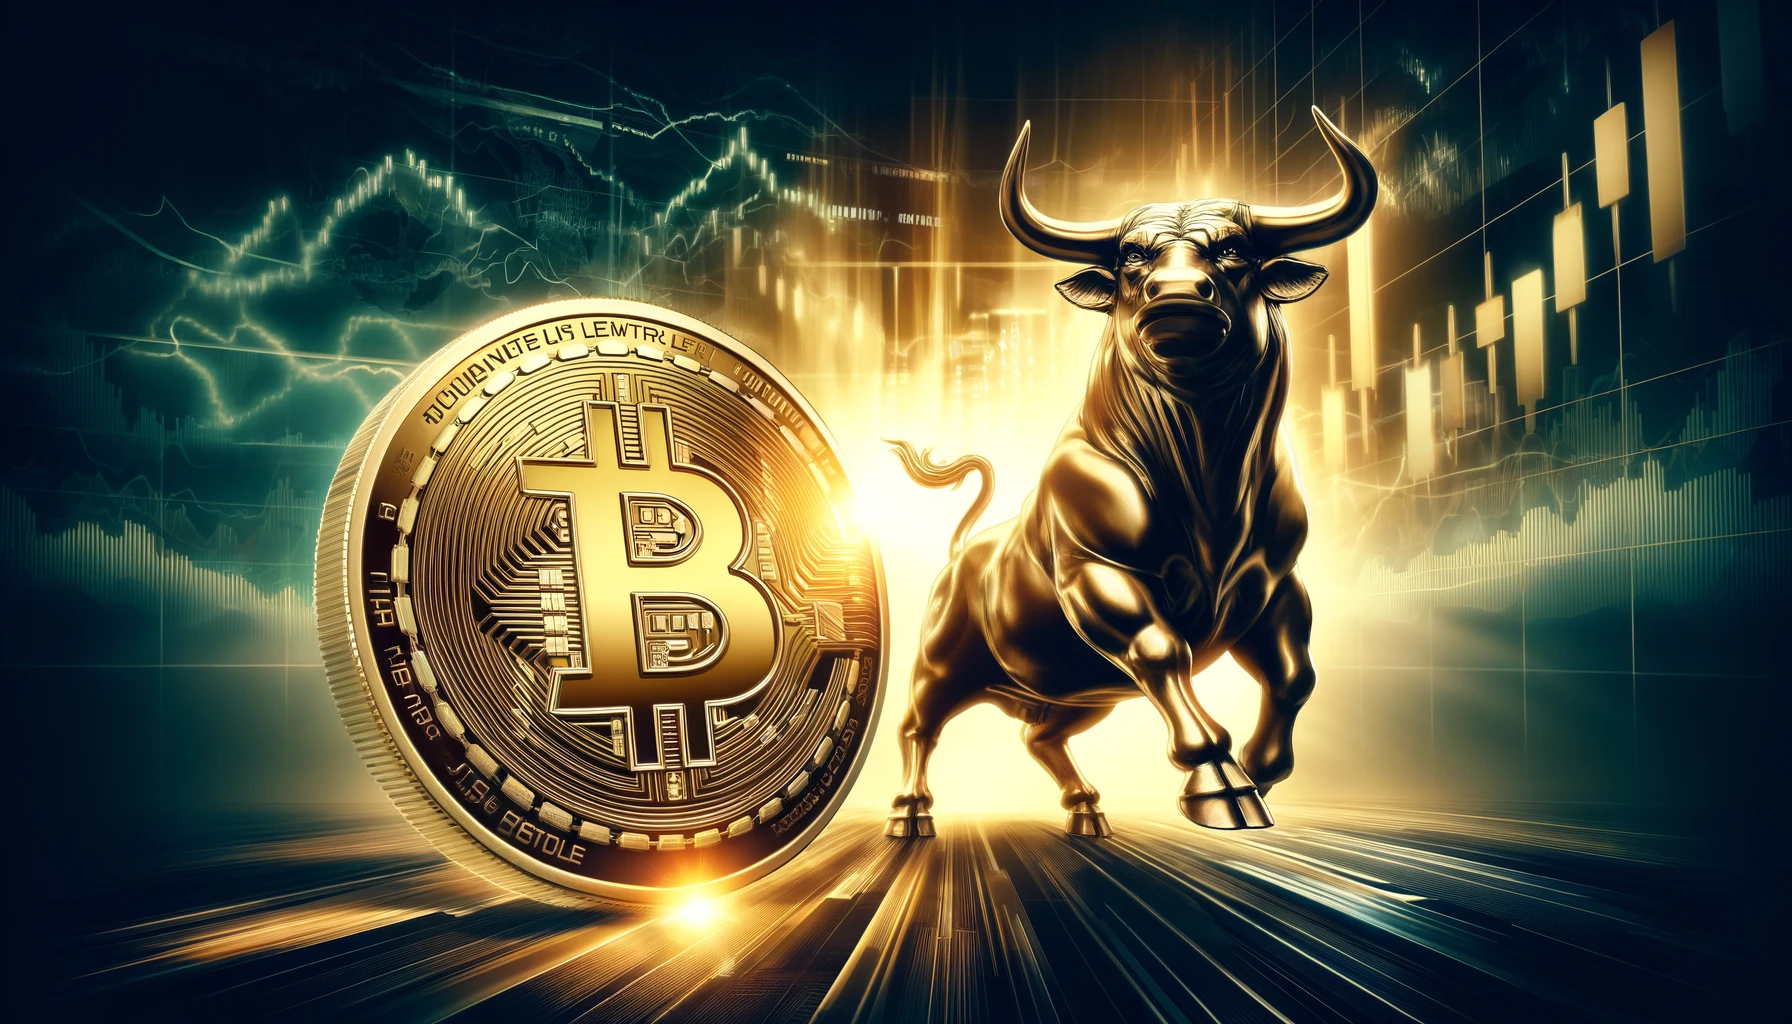 Bitcoin Bulls Are Strong: Over 450,000 Addresses Bought 273,000 BTC At This Level